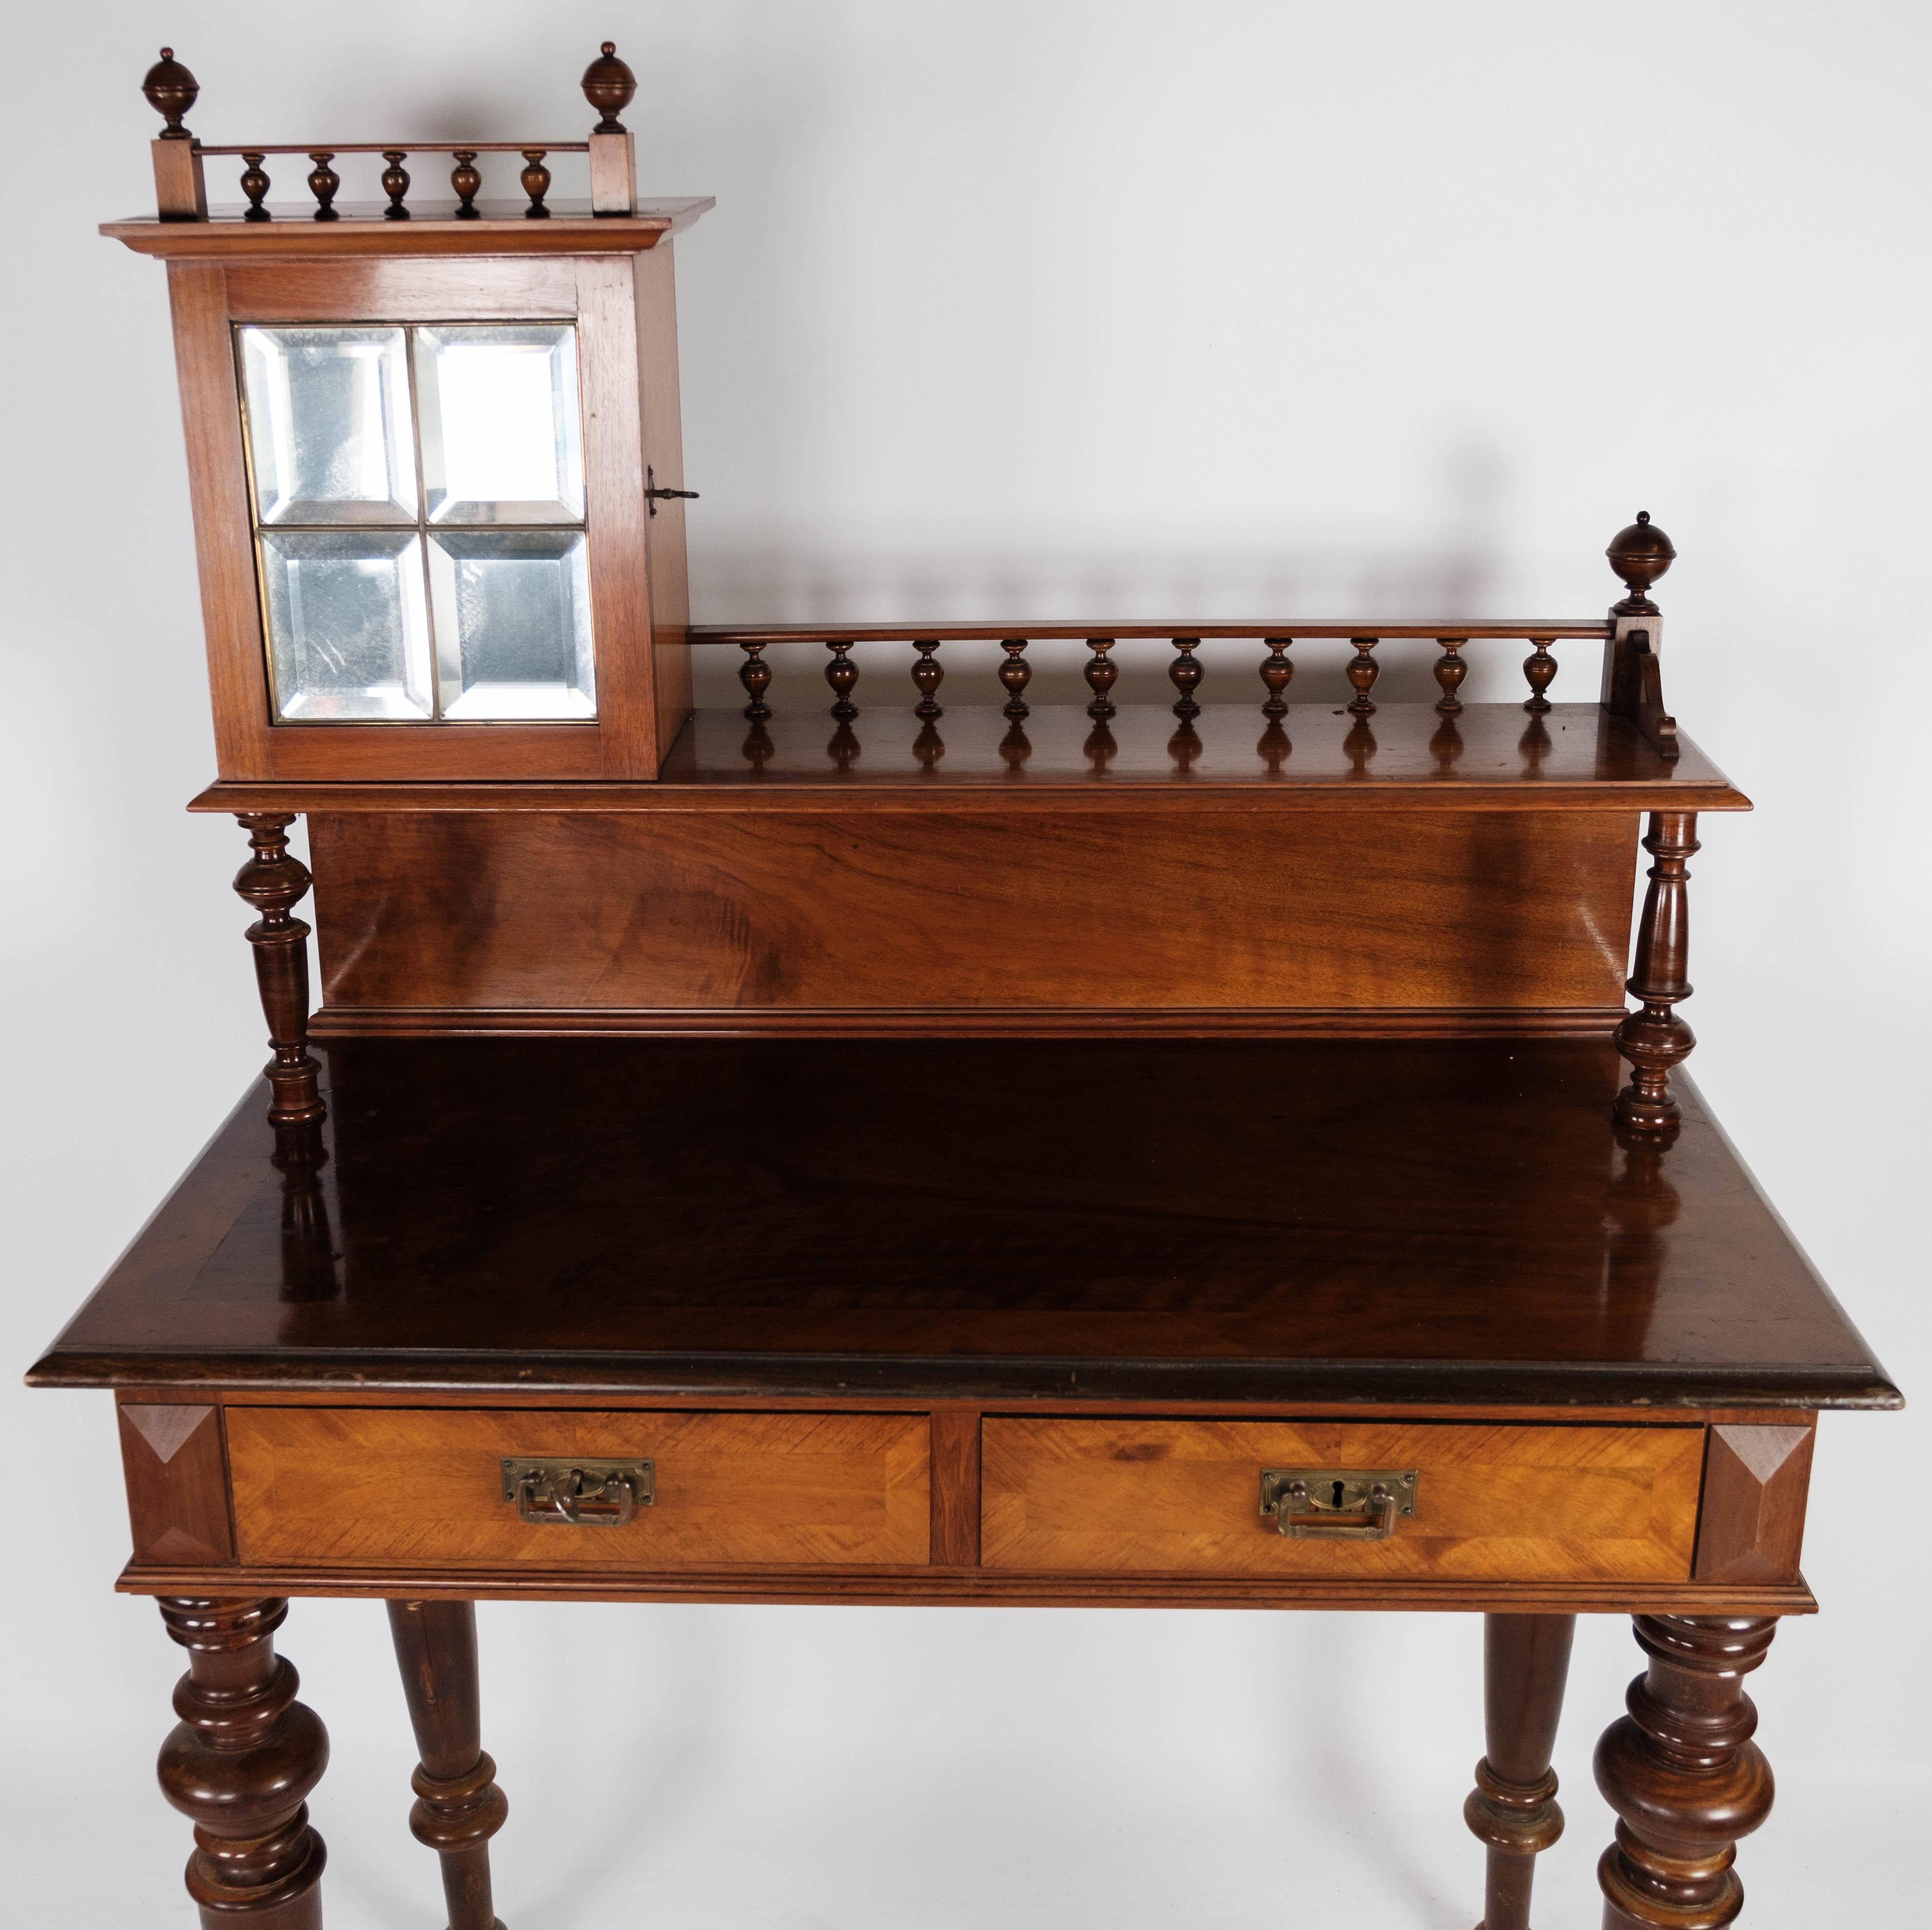 This dressing table, crafted from walnut with glass accents, is a magnificent example of 19th-century craftsmanship. Dating back to the 1880s, it exudes the charm and elegance of the Victorian era.

The rich tones of the walnut wood lend a sense of